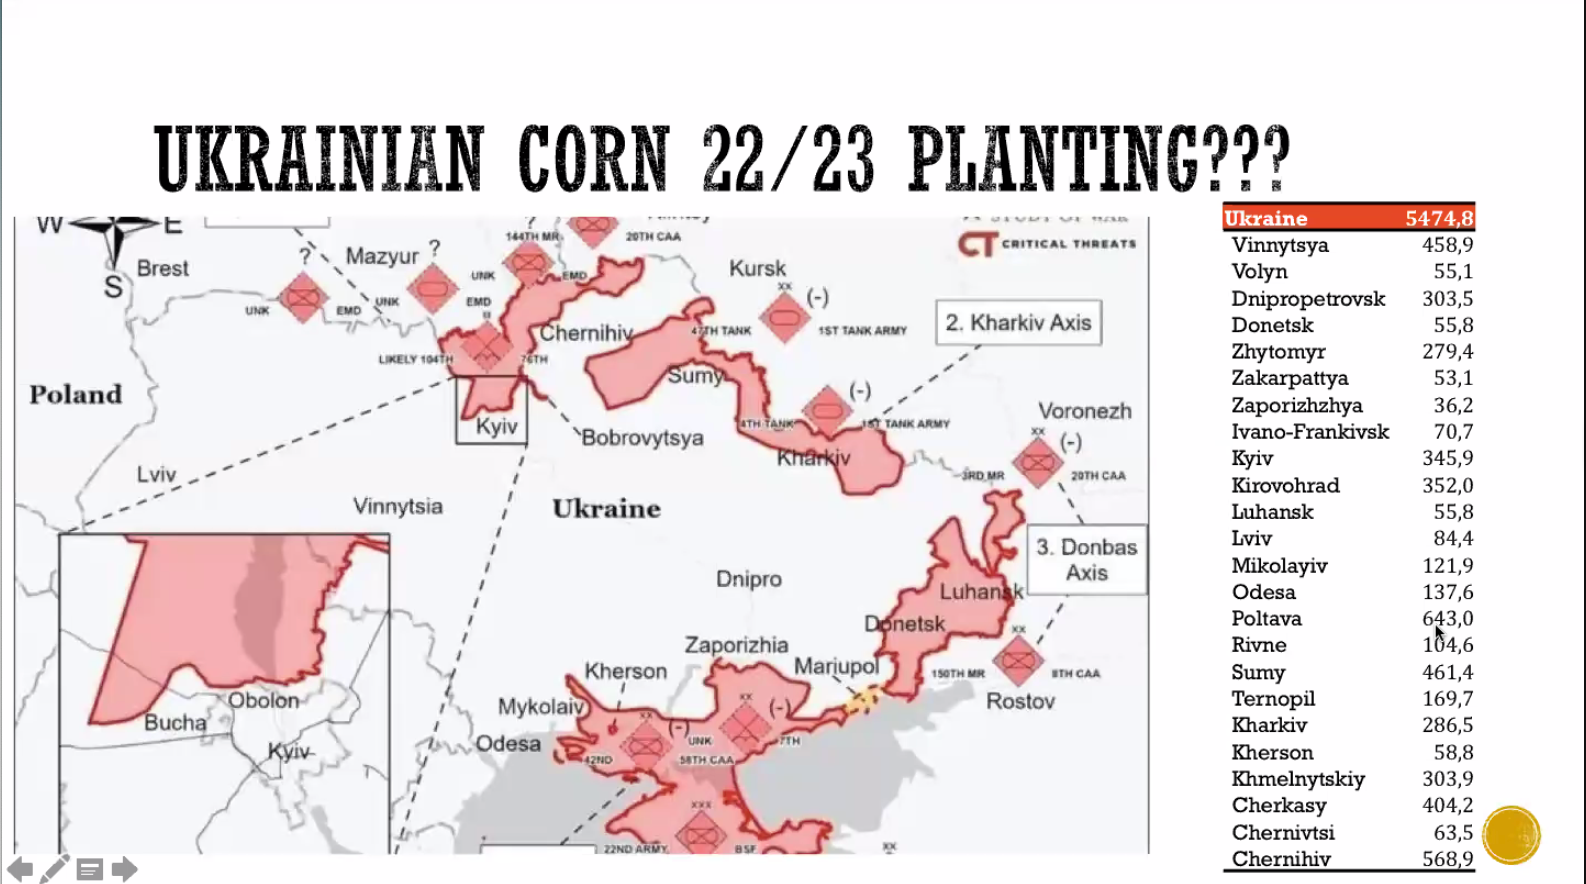 Corn planned sown area by regions and a map of Russian invasion (click for higher resolution)